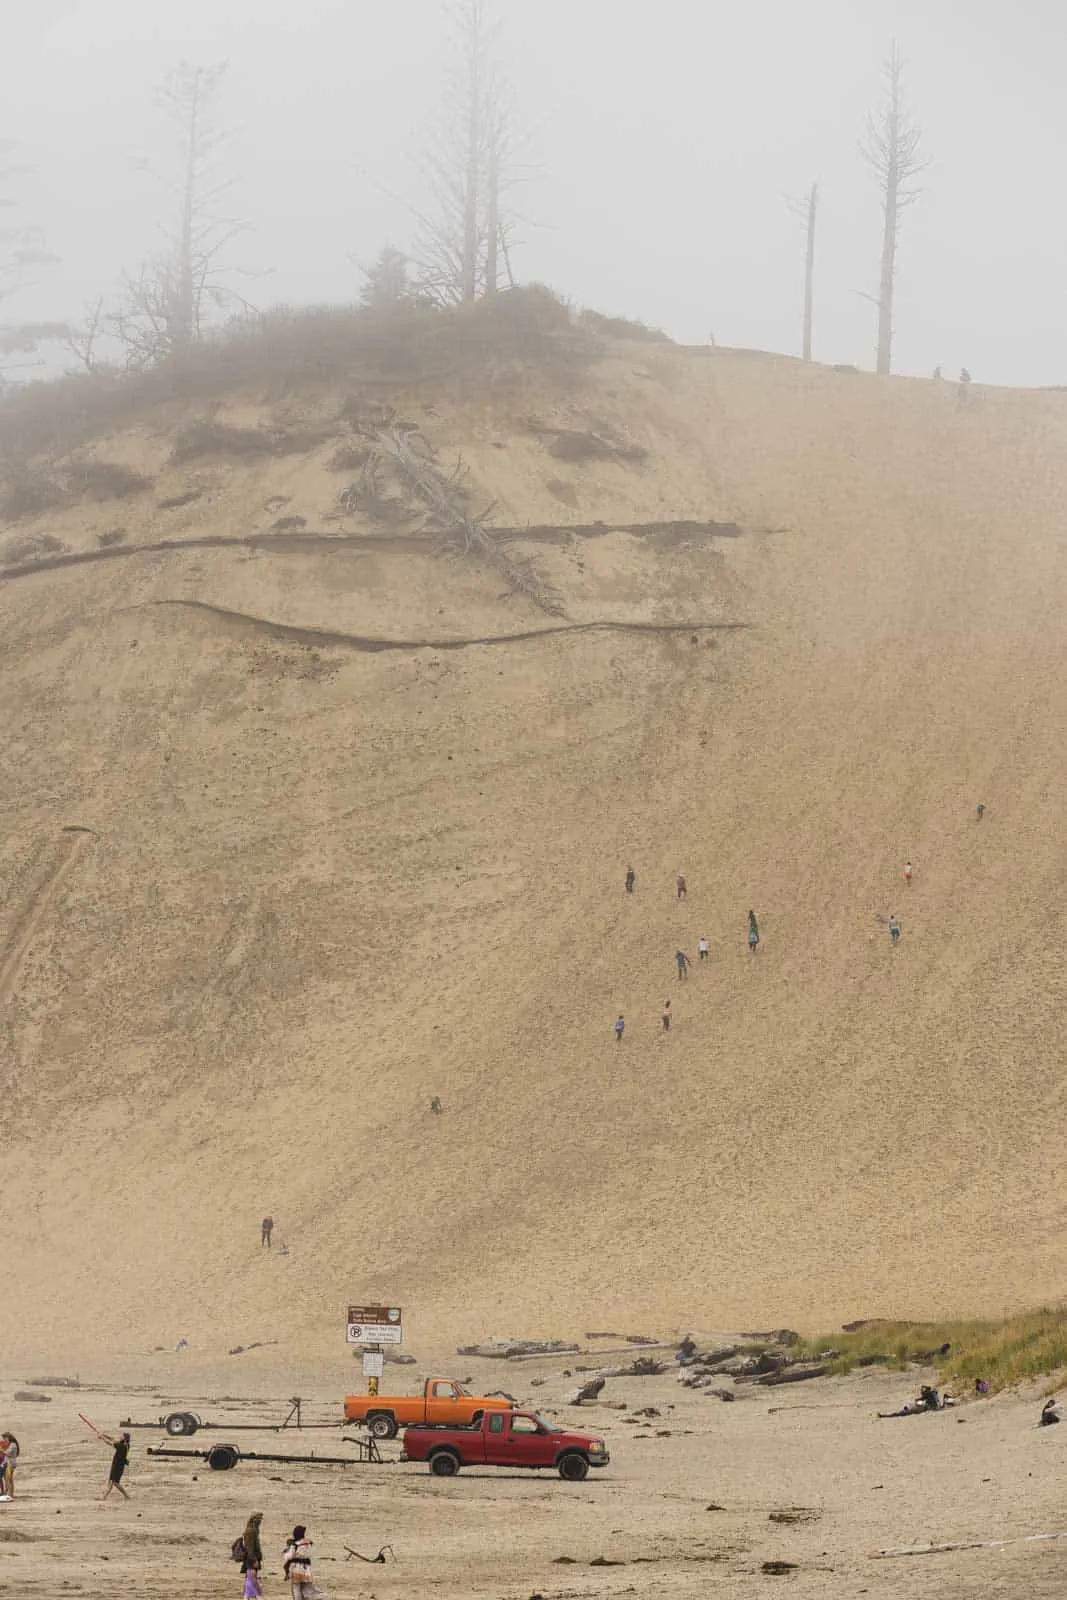 Giant sand dune in the fog with people climbing it at Cape Kiwanda